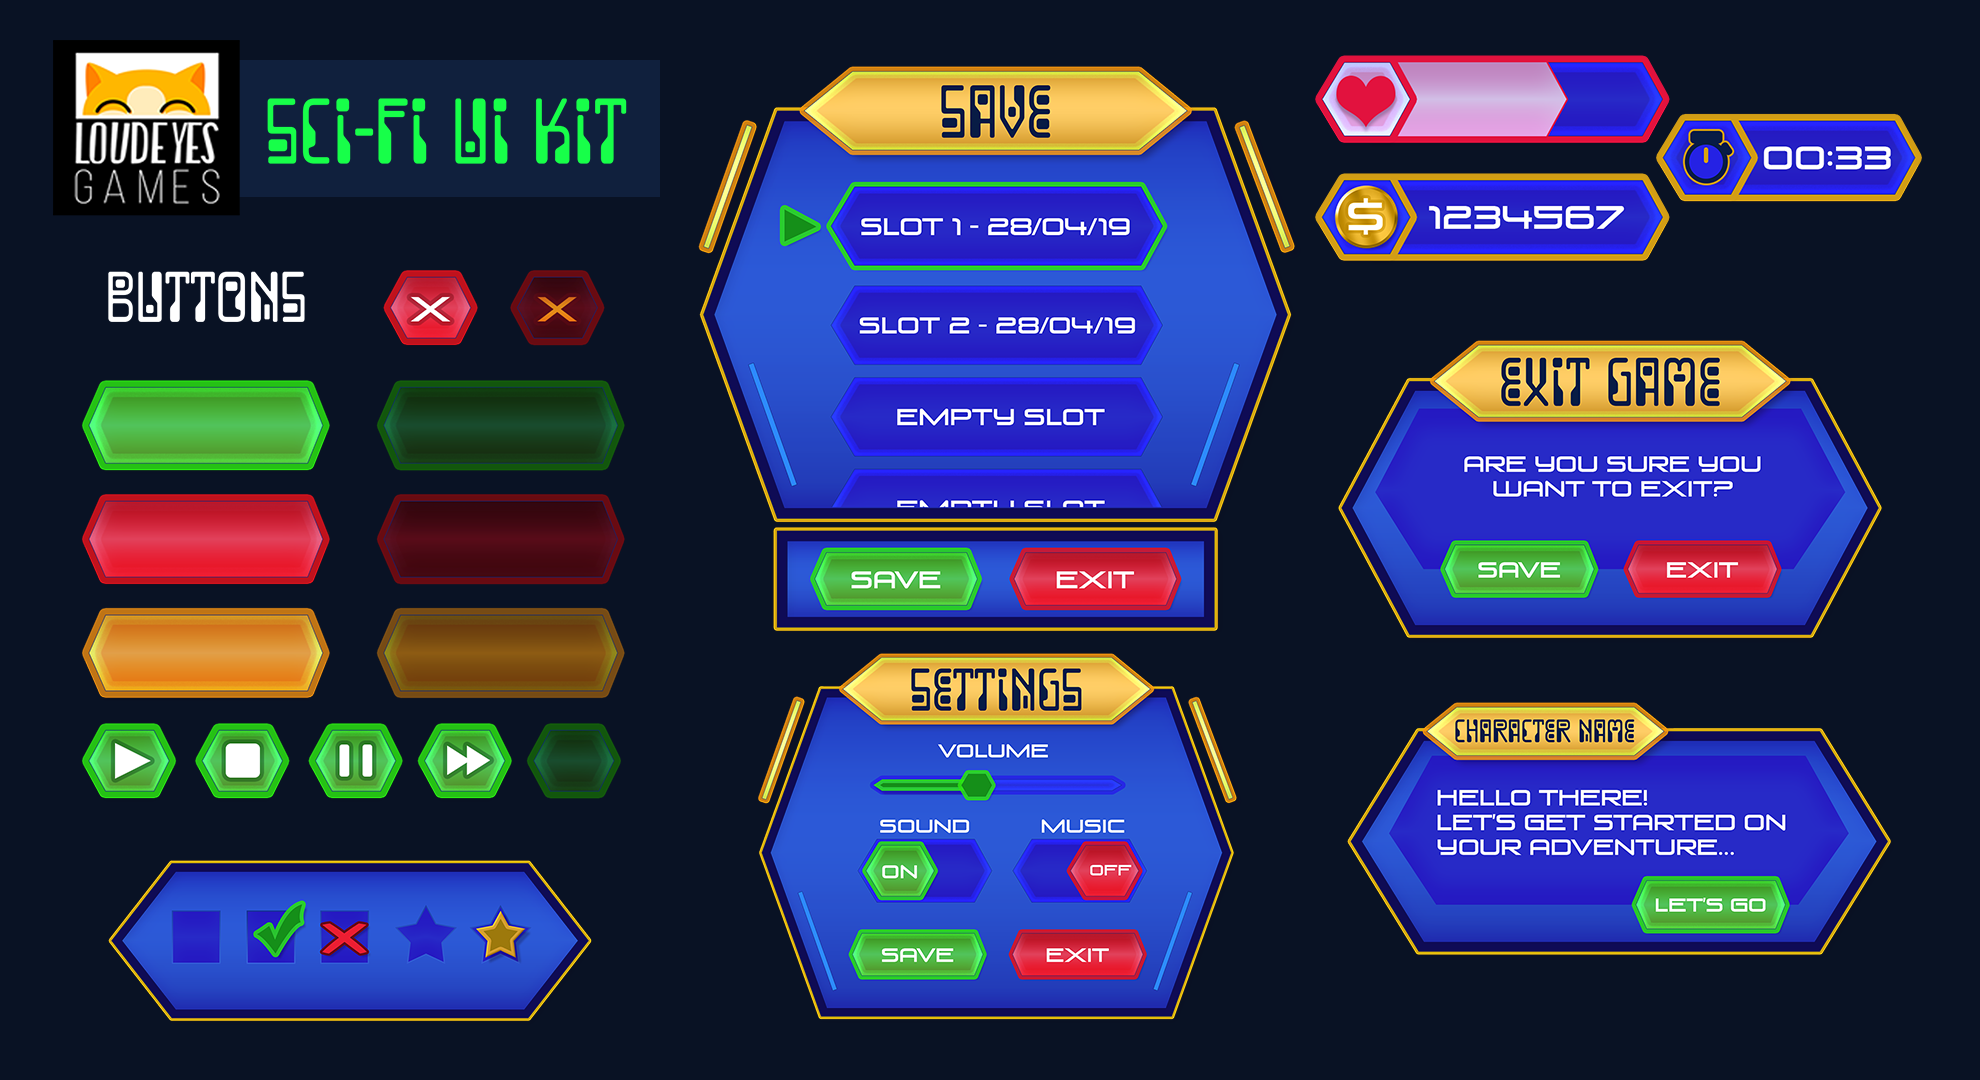 Sci Fi UI Asset Pack for Games by LoudEyes